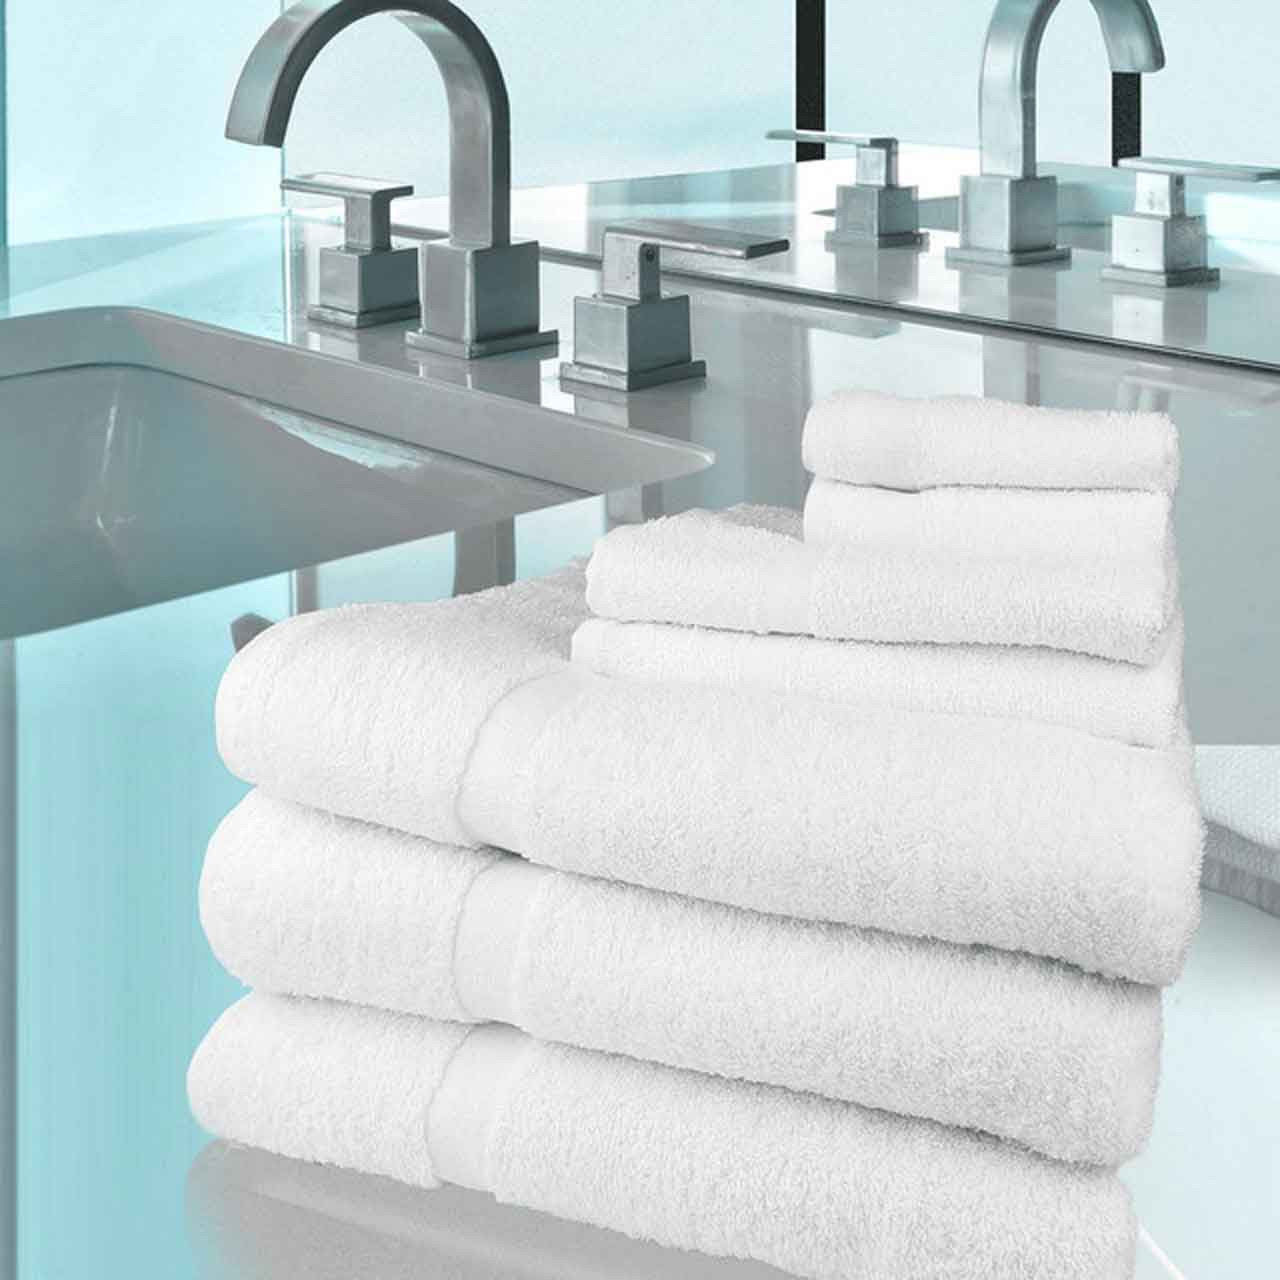 What towels do most hotels use?